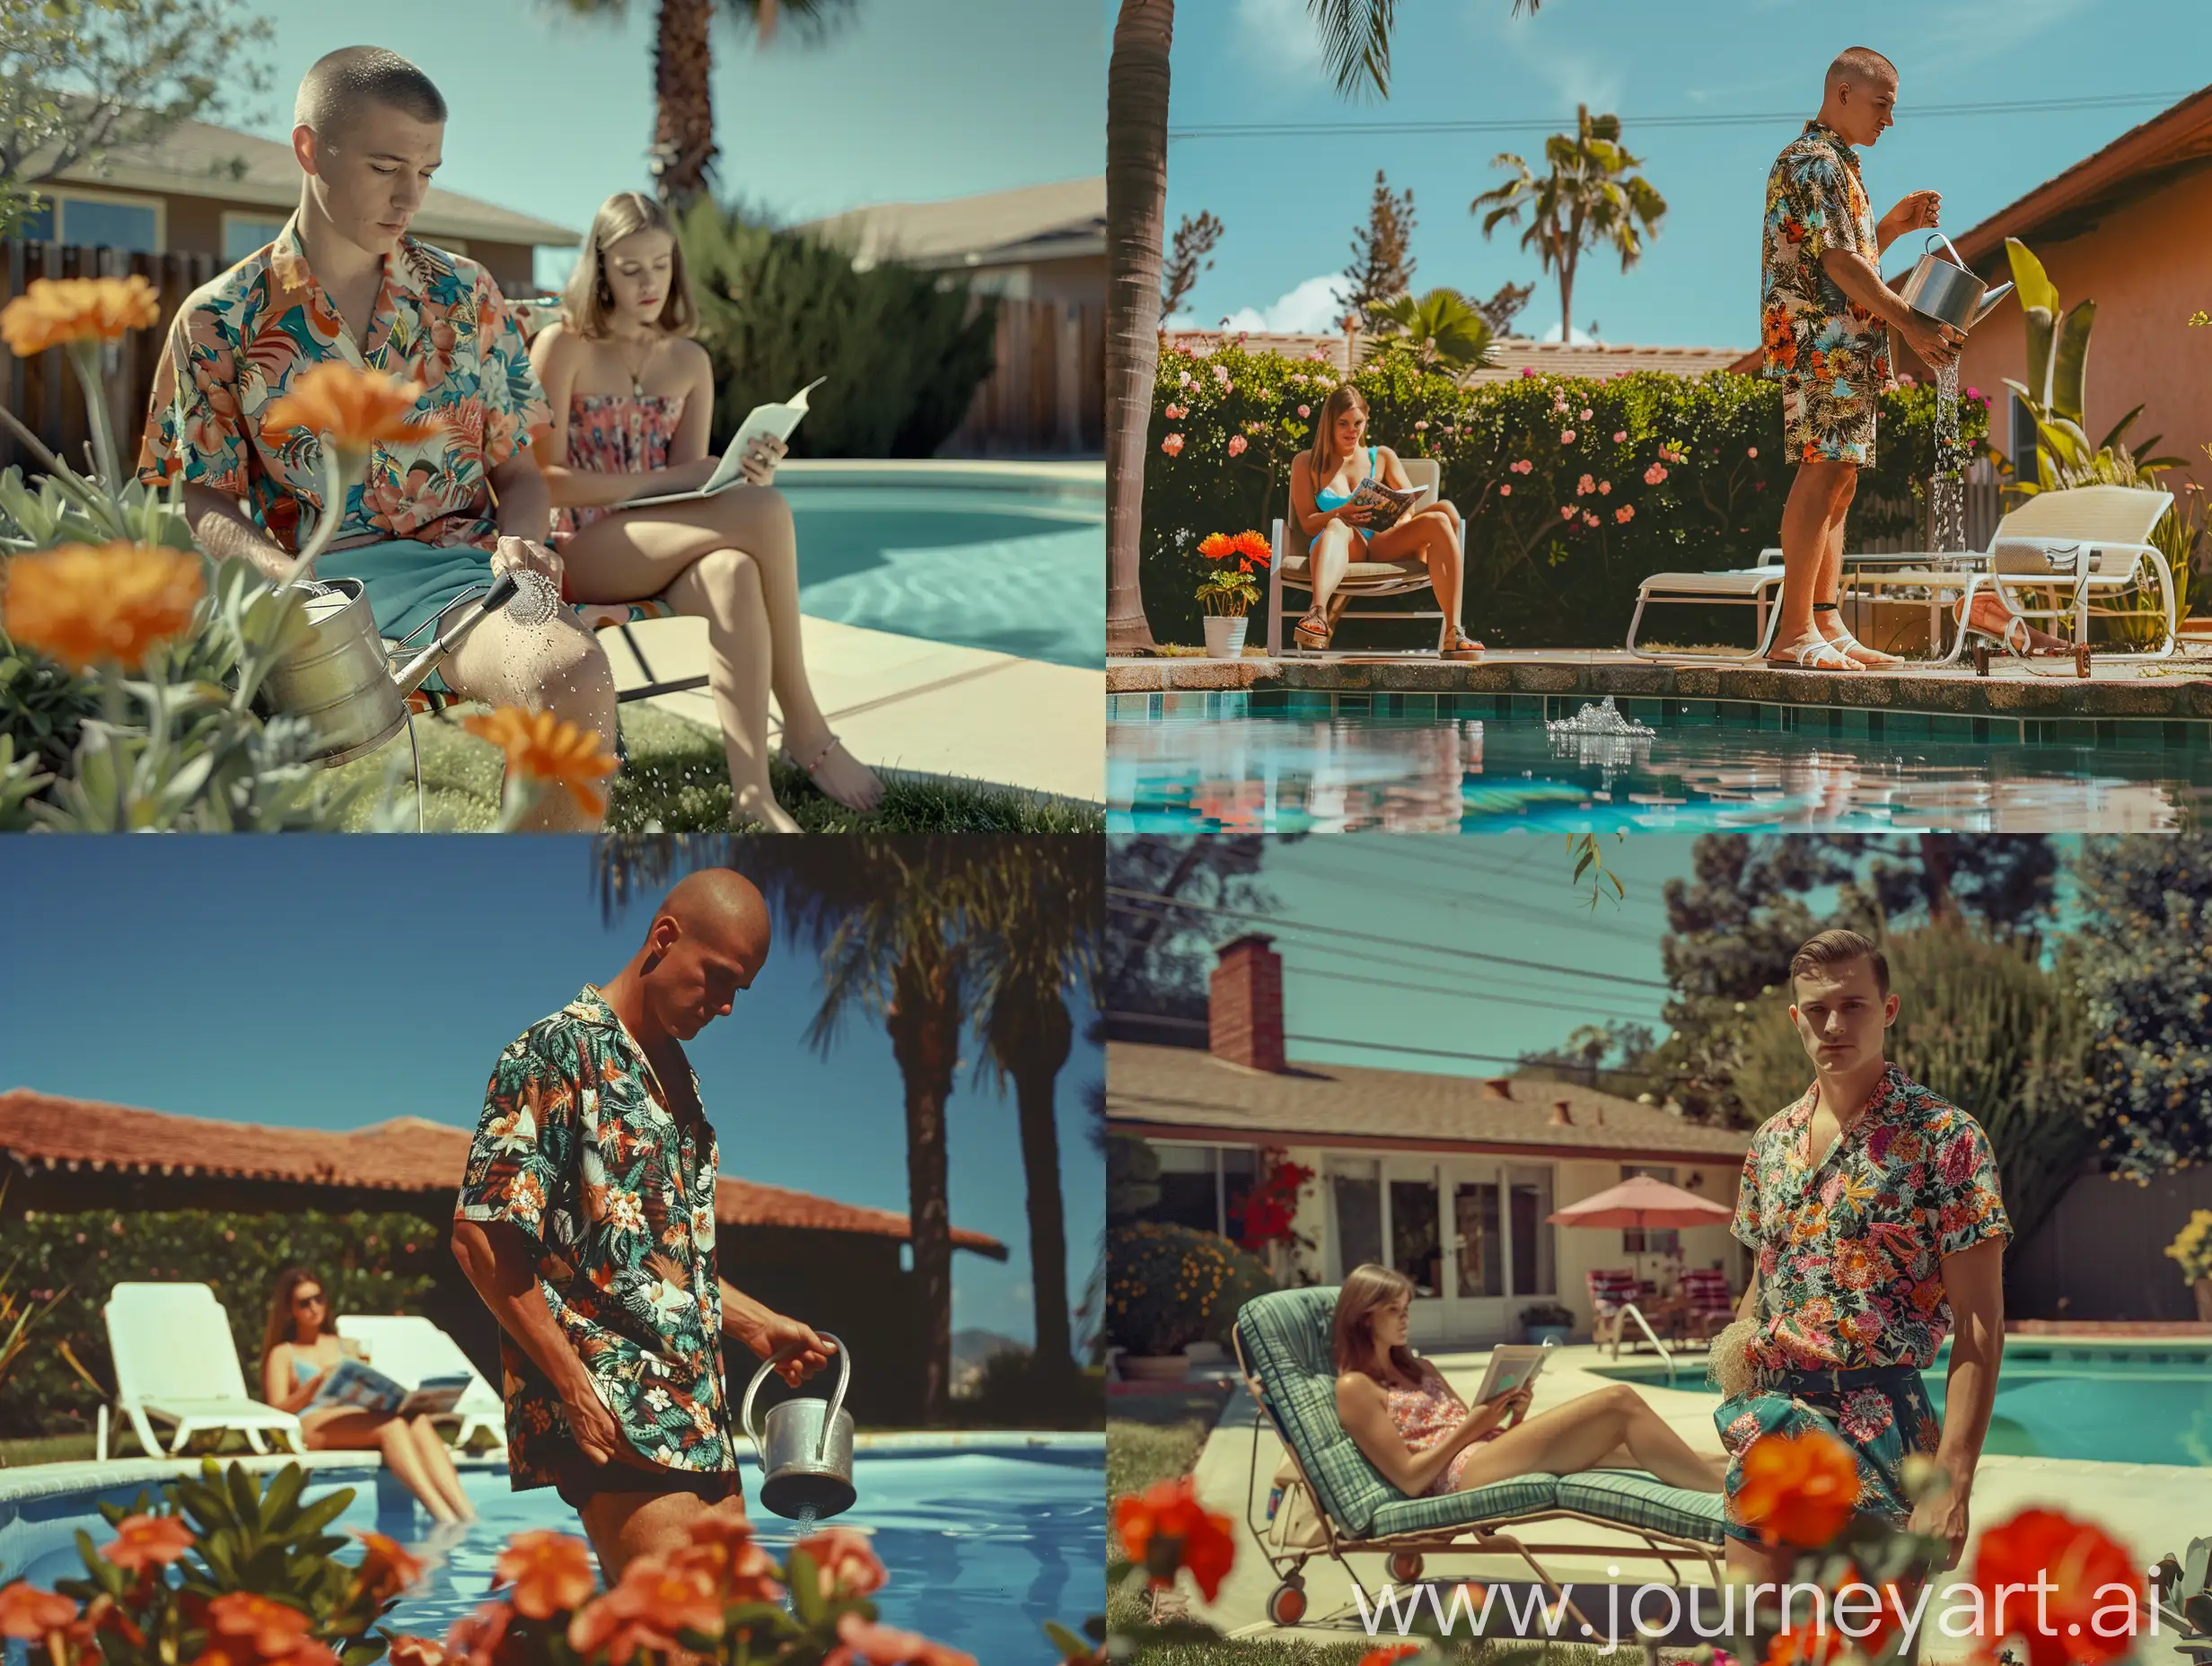 Man-with-Buzzcut-Watering-Flowers-Girlfriend-Relaxing-by-Poolside